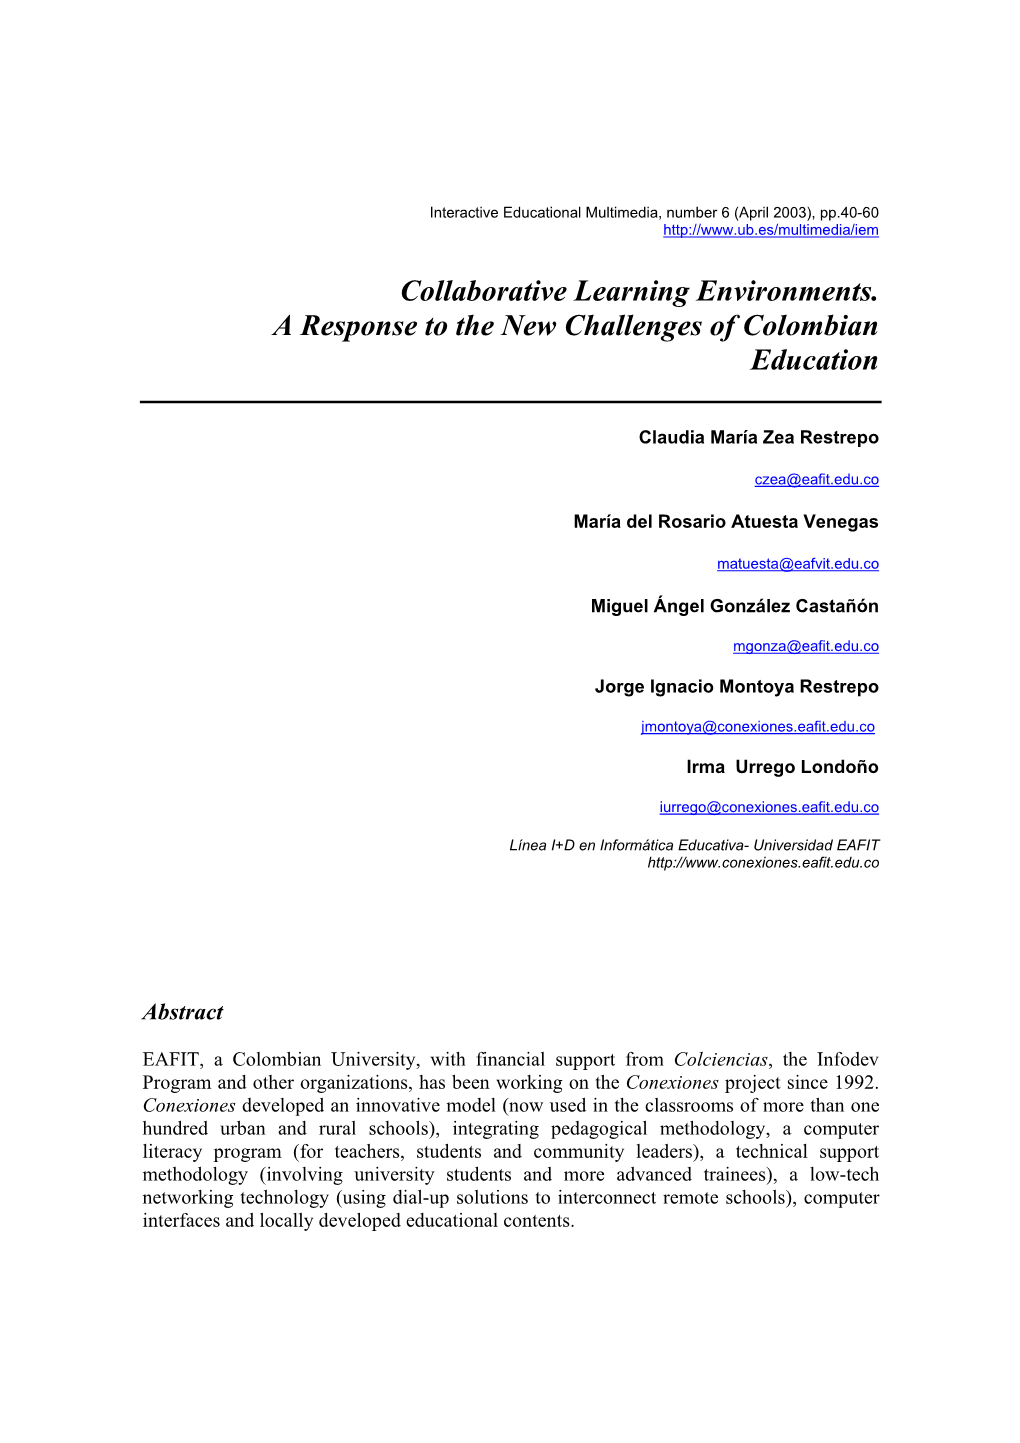 Collaborative Learning Environments. a Response to the New Challenges of Colombian Education